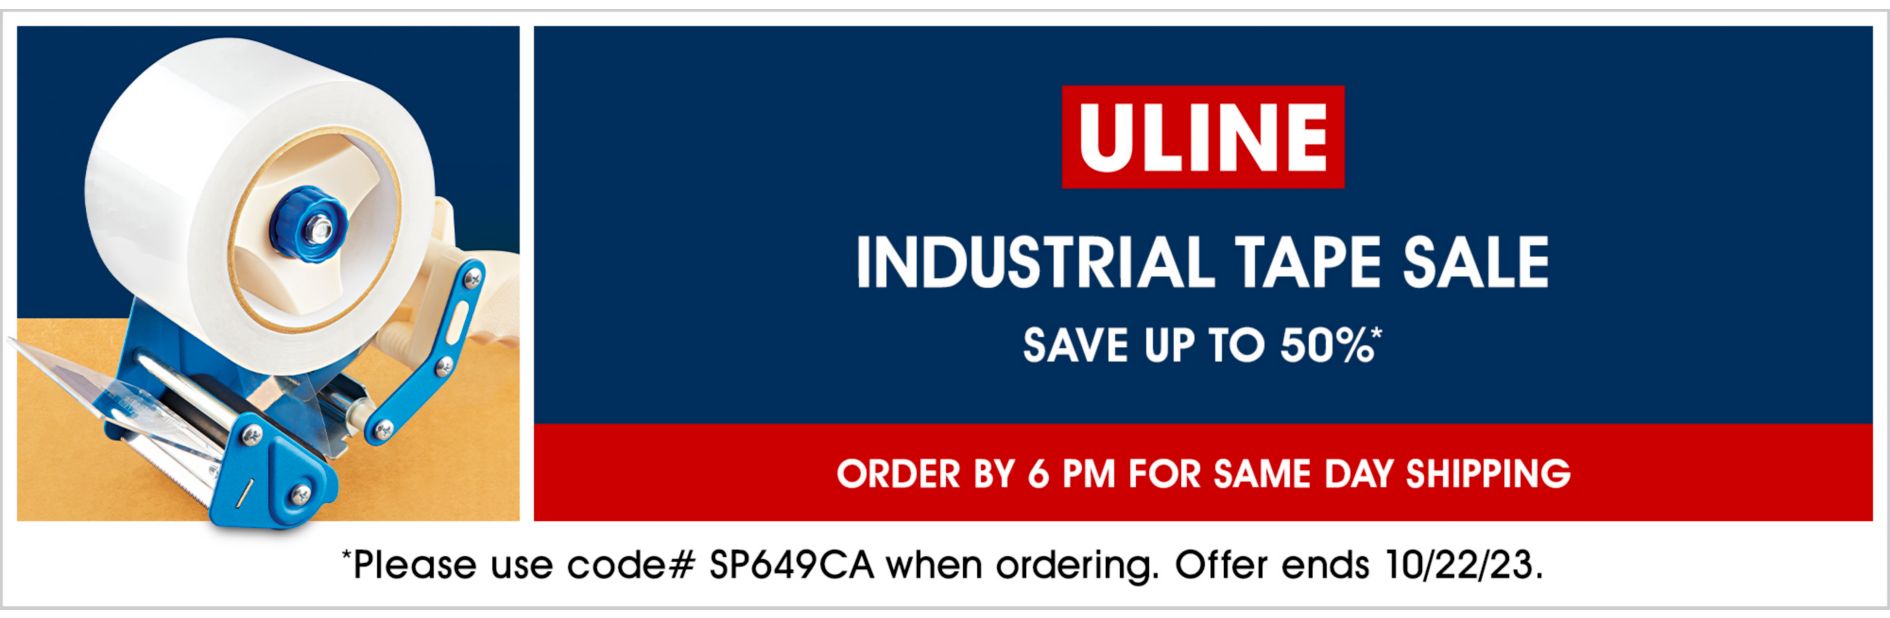 SP649 Industrial Tape Sale, Save up to 50%, Use code SP649CA, Offer ends 10/22/23